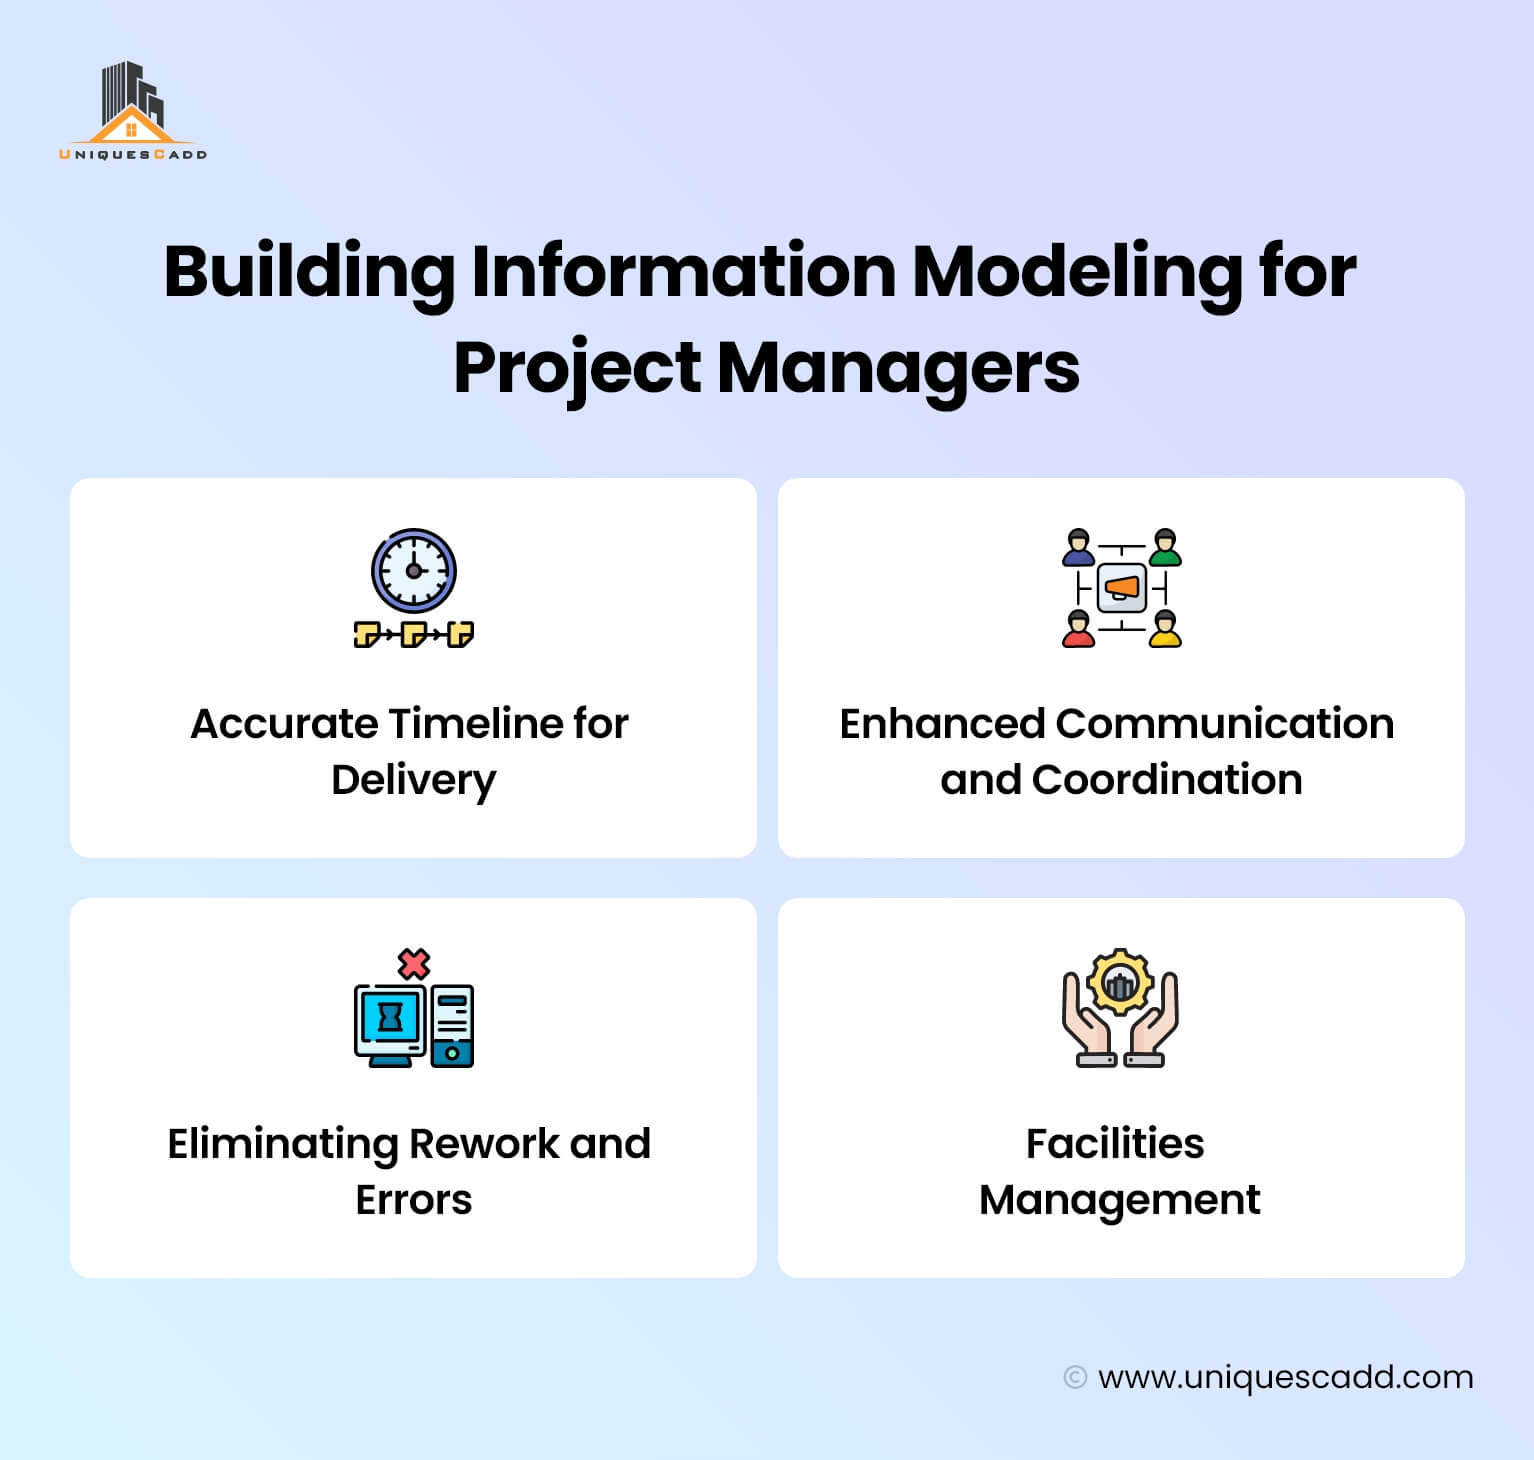 Building Information Modeling for Project Managers